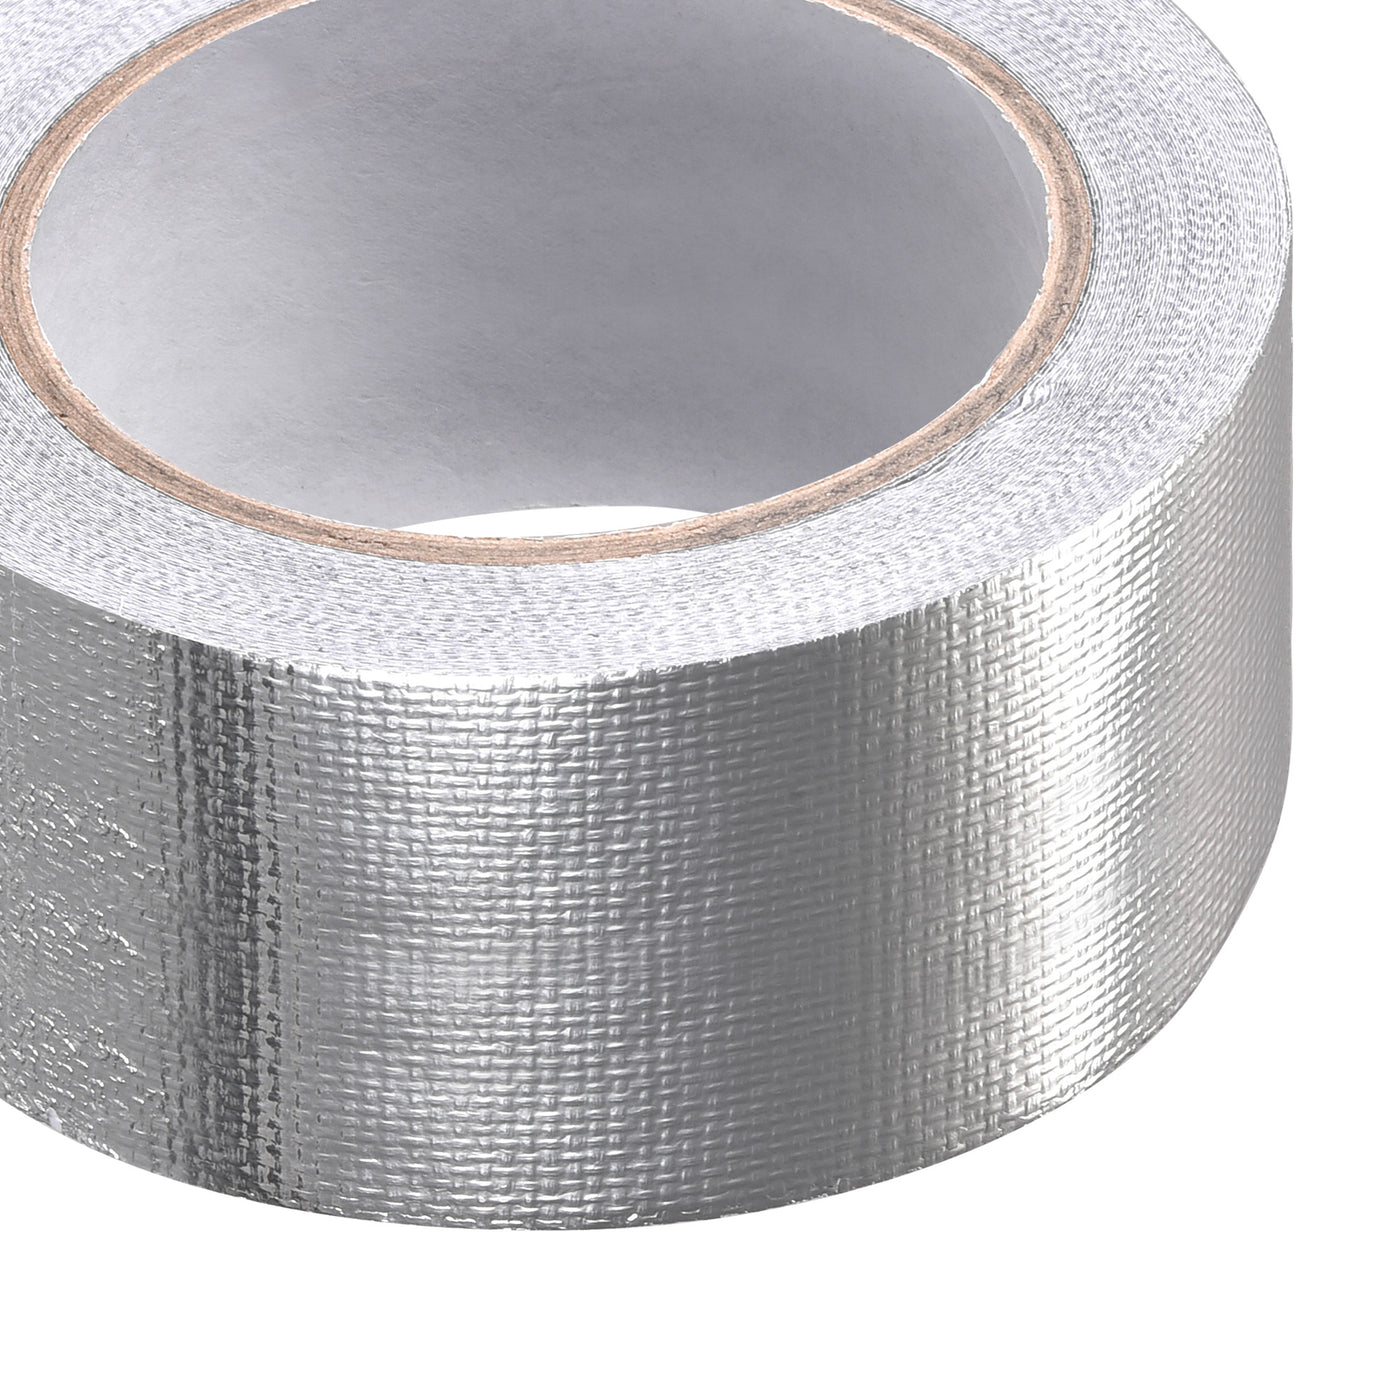 uxcell Uxcell Aluminum Foil Tape High-Temperature Tape for HVAC,Sealing 60mmx20m/65ft